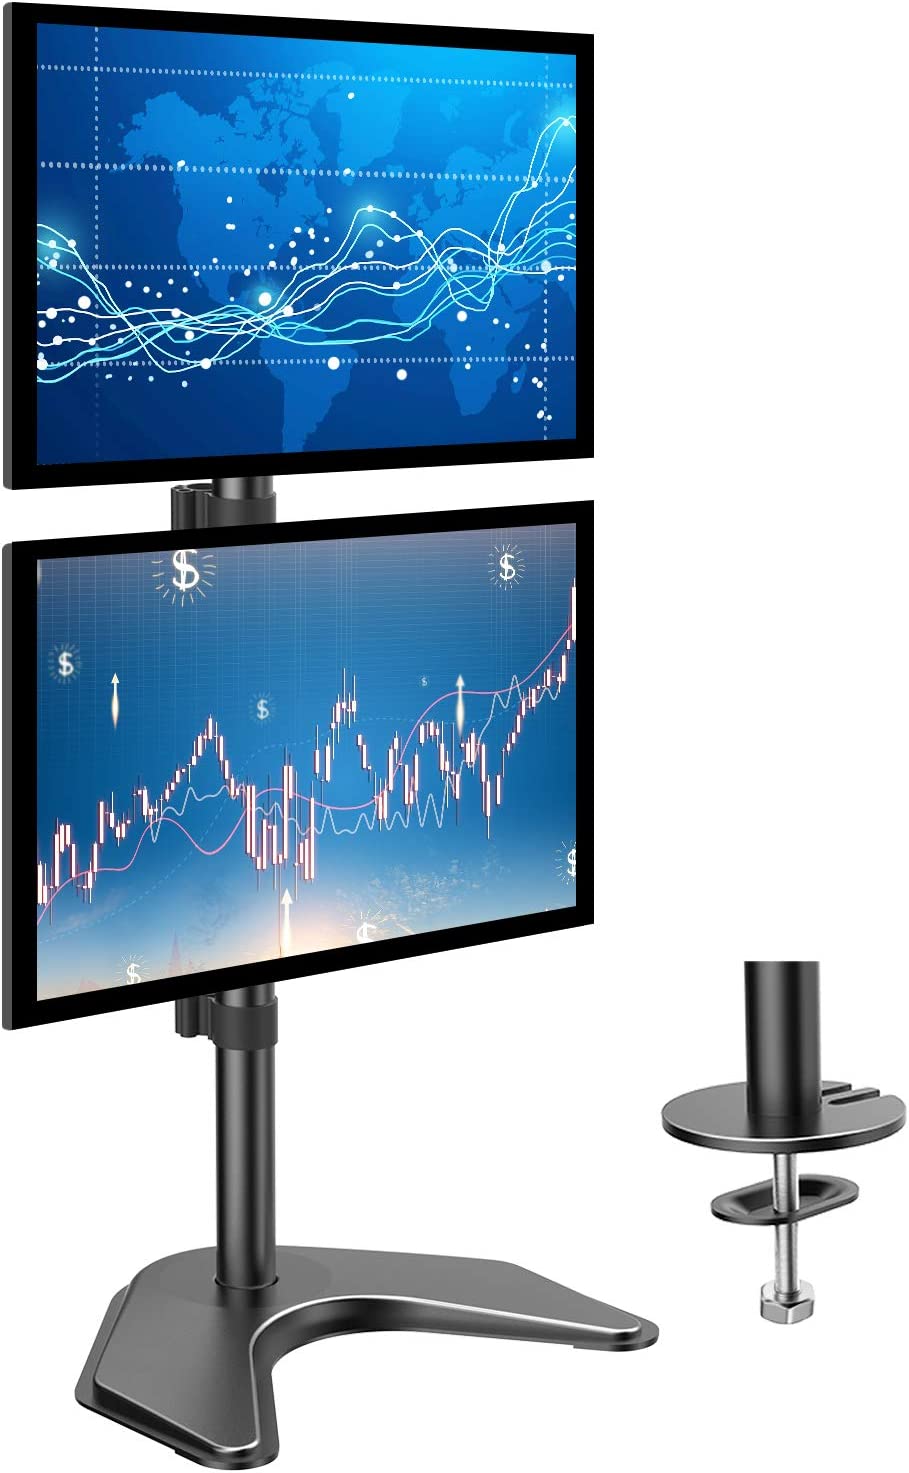 Huanuo Vertical Position Dual Monitor Stand (for 13"-32" Monitors) $27 + Free Shipping